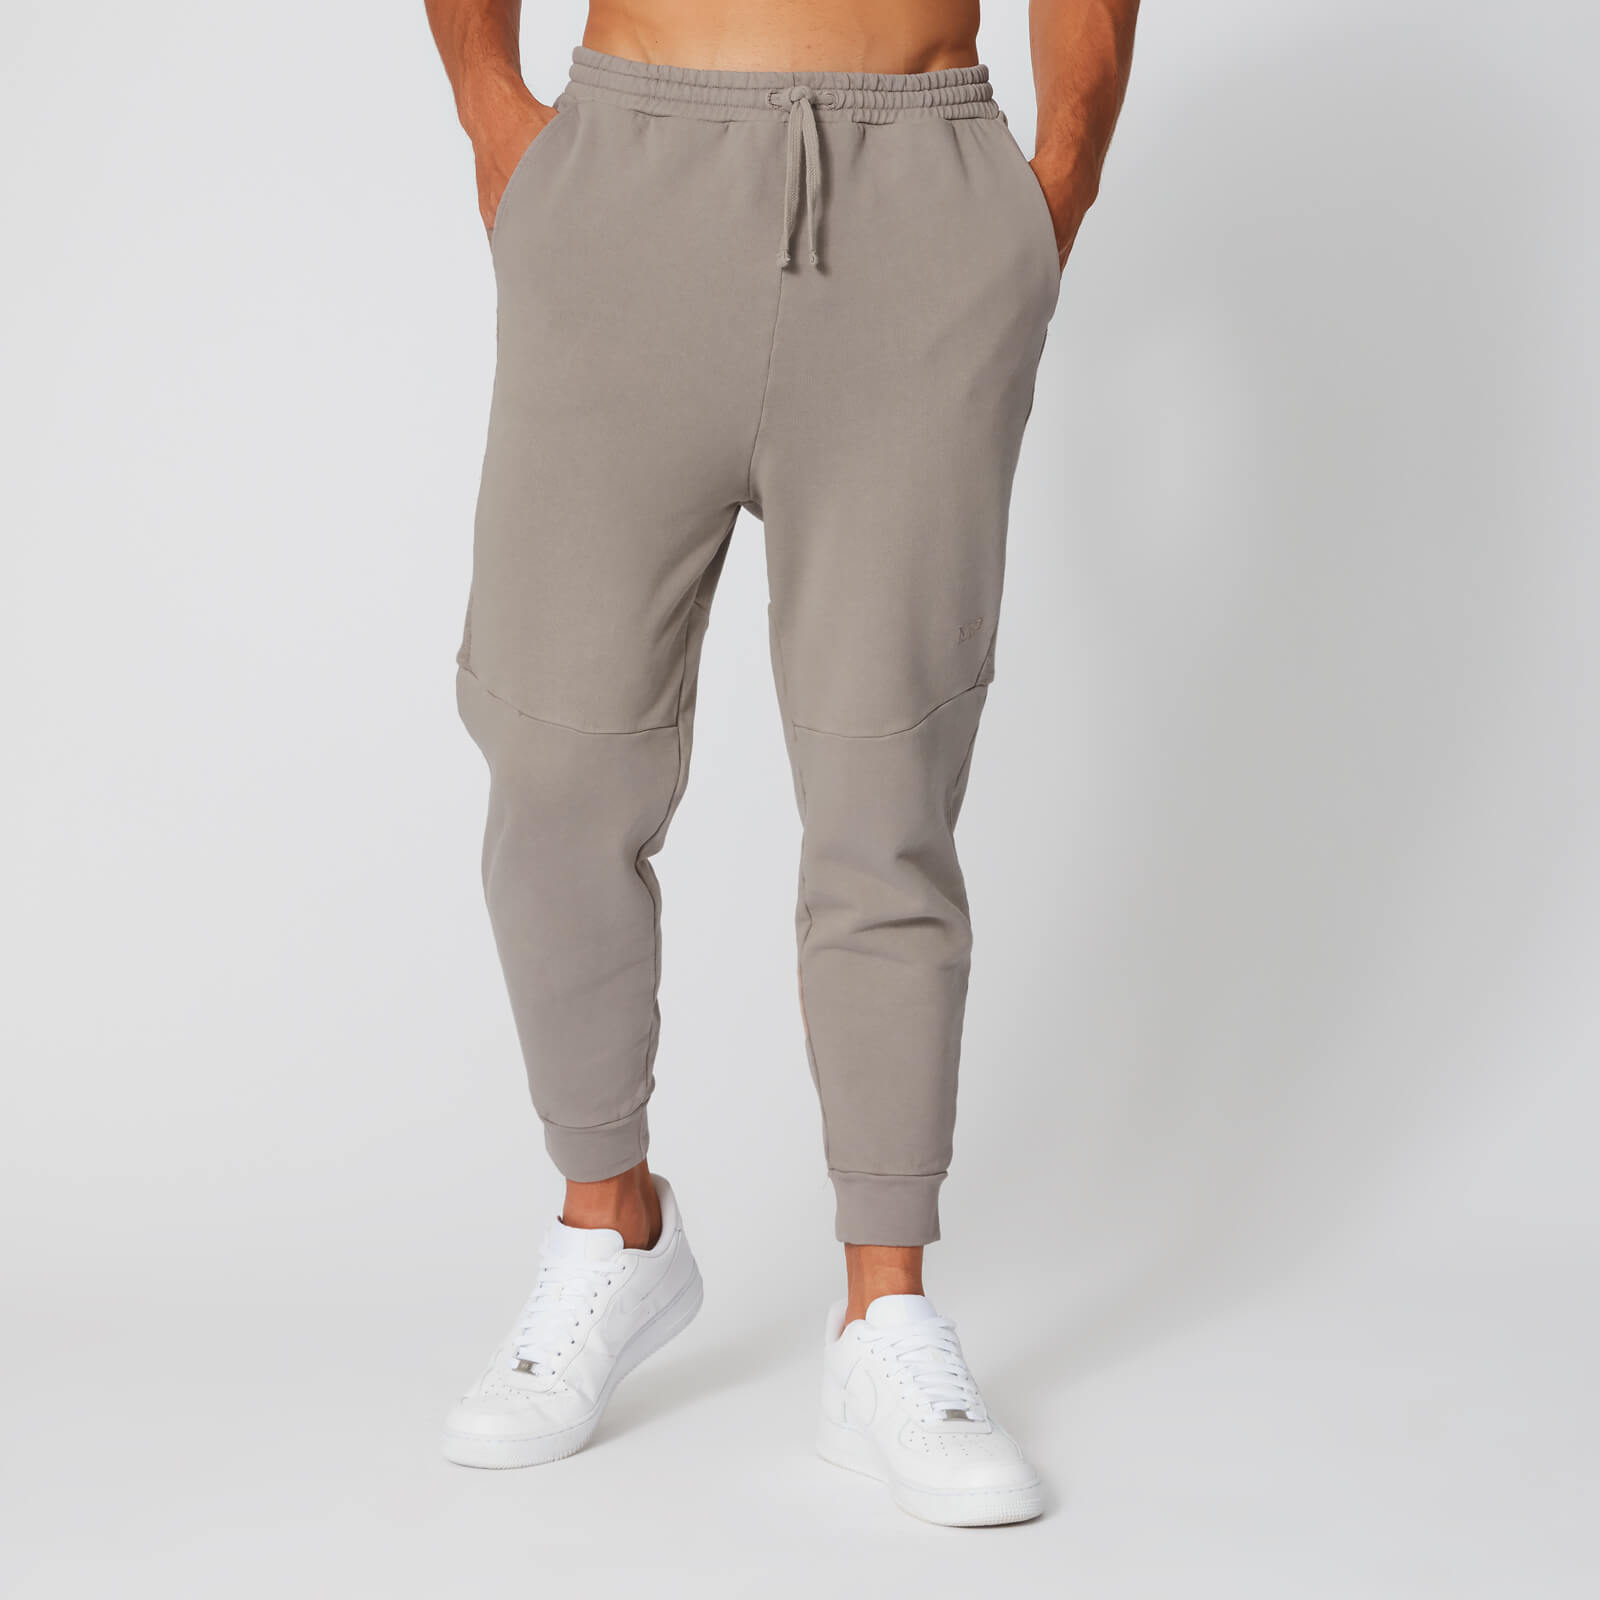 Myprotein Washed Joggers - Quarry - S